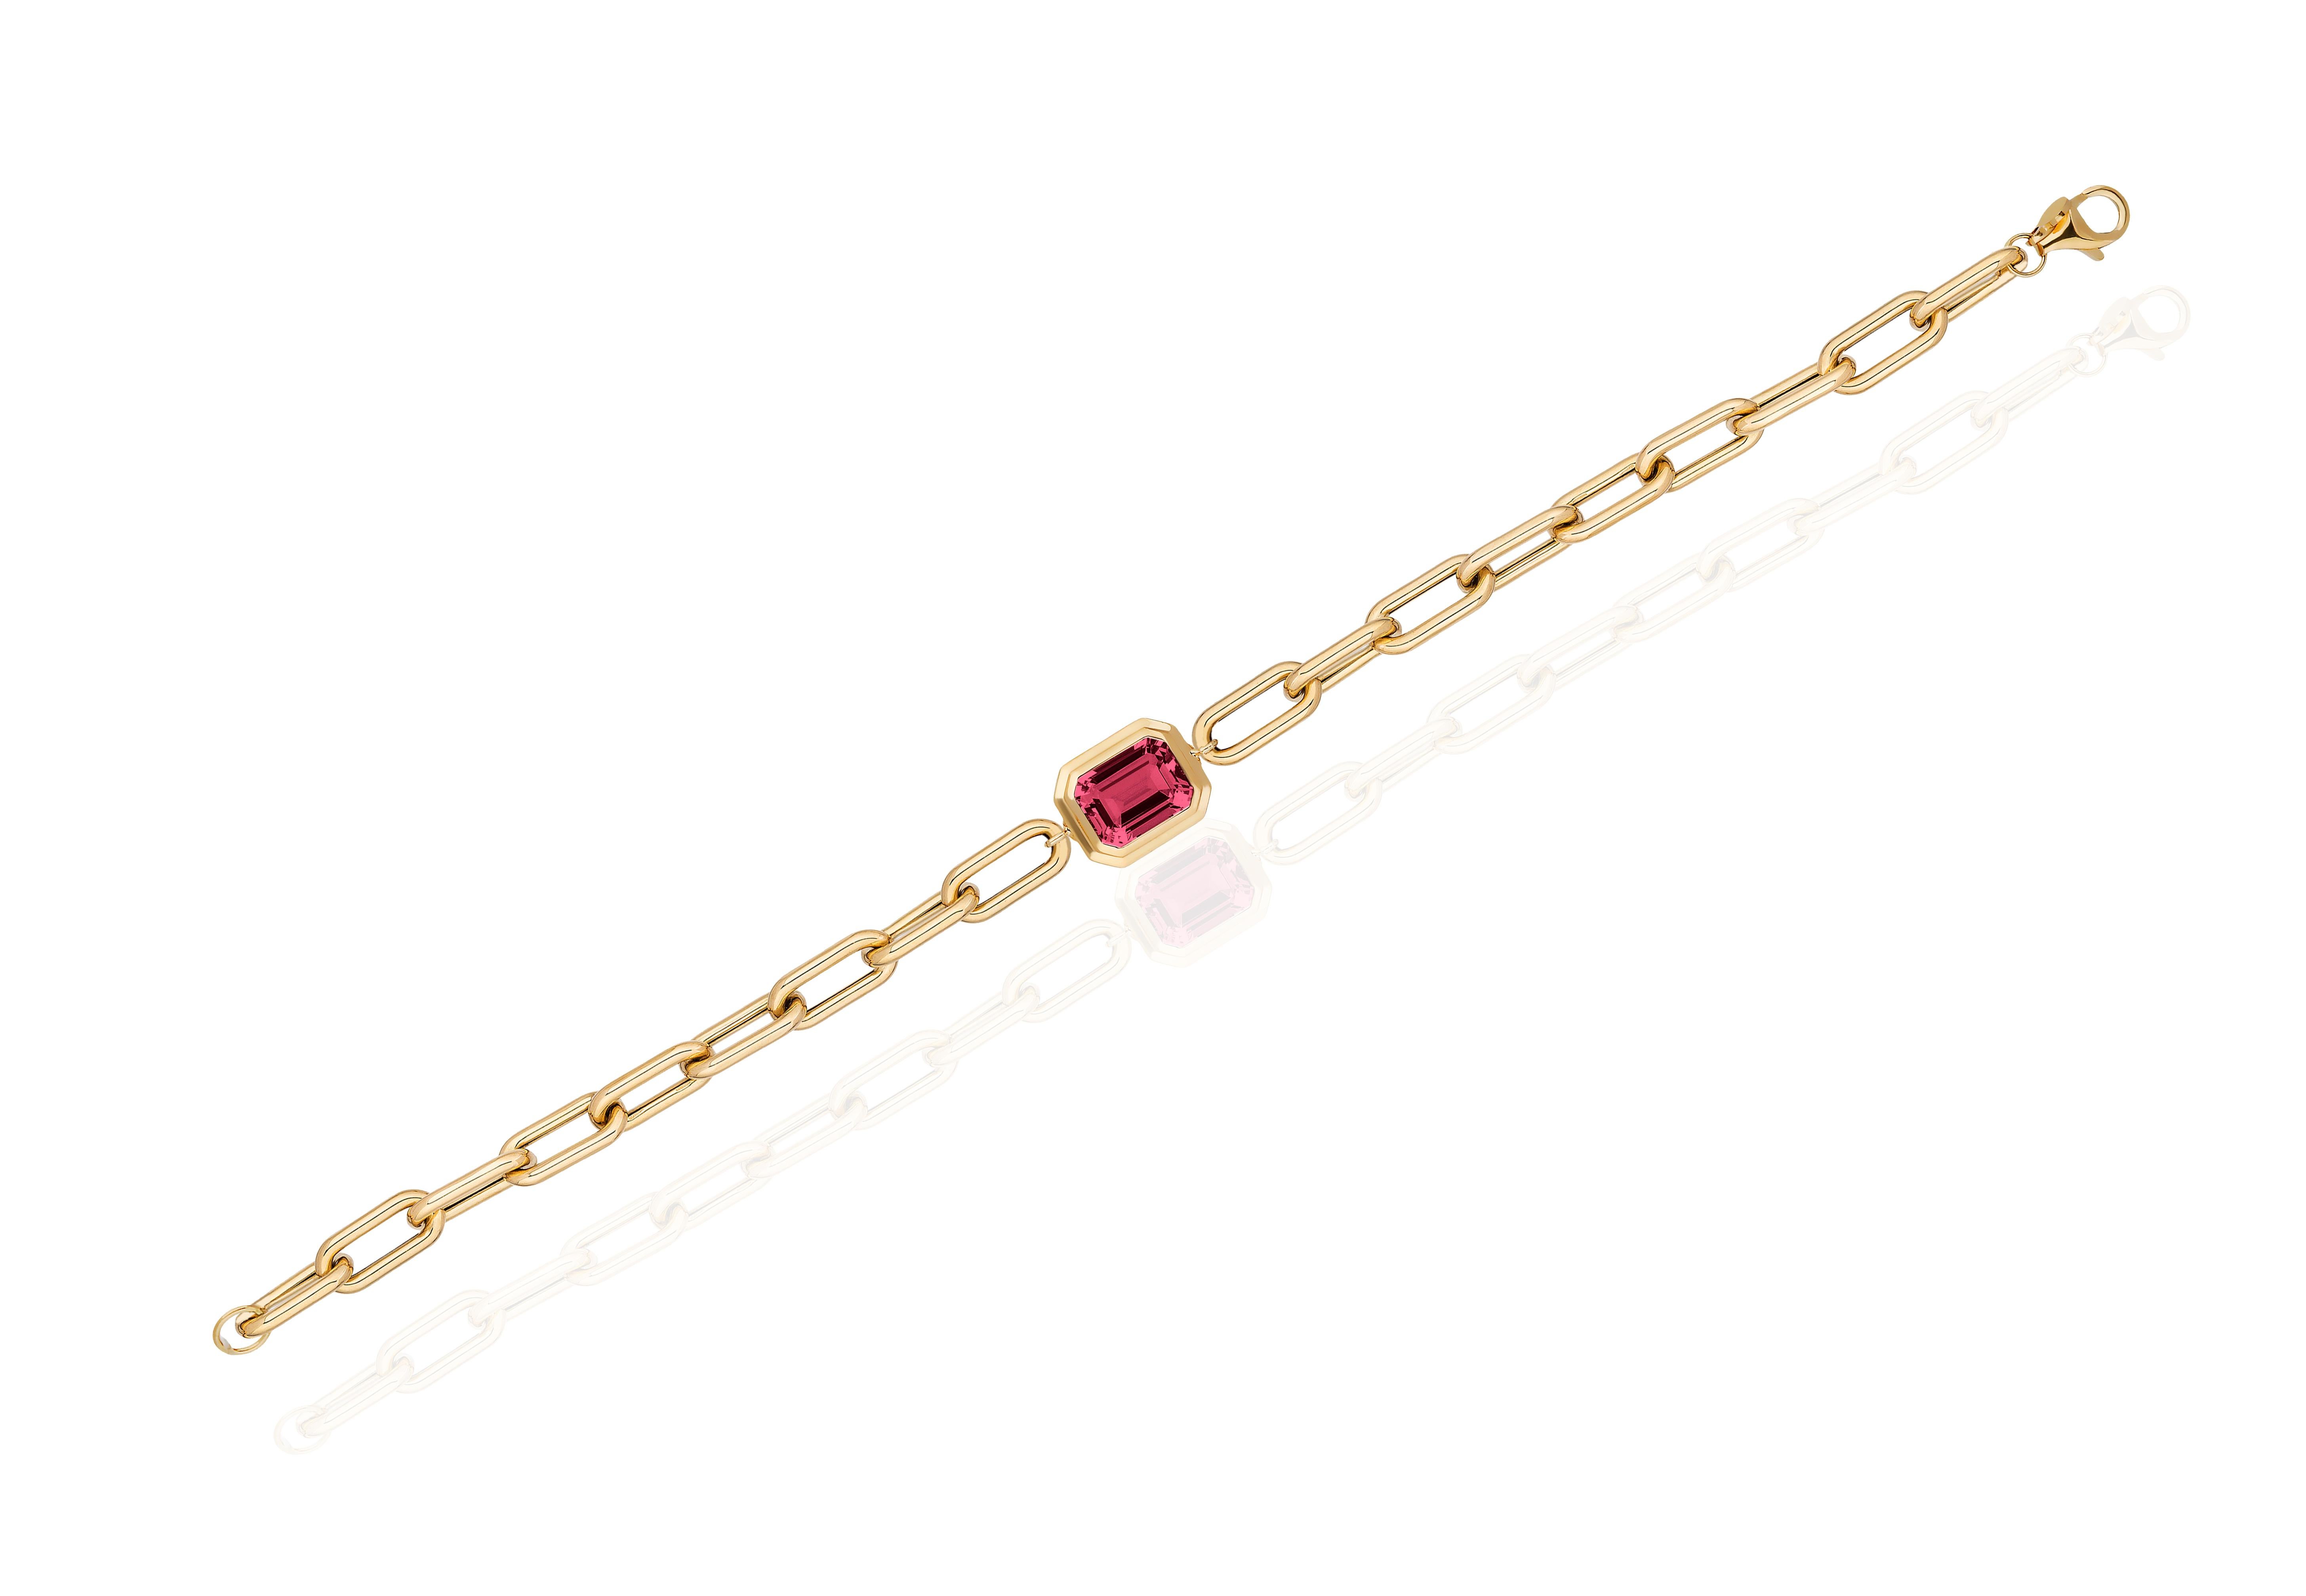 Garnet Emerald Cut Bezel Set Bracelet in 18K Yellow Gold, from 'Manhattan' Collection. Minimalist lines yet bold structures are what our Manhattan Collection is all about. Our pieces represent the famous skyline and cityscapes of New York City which